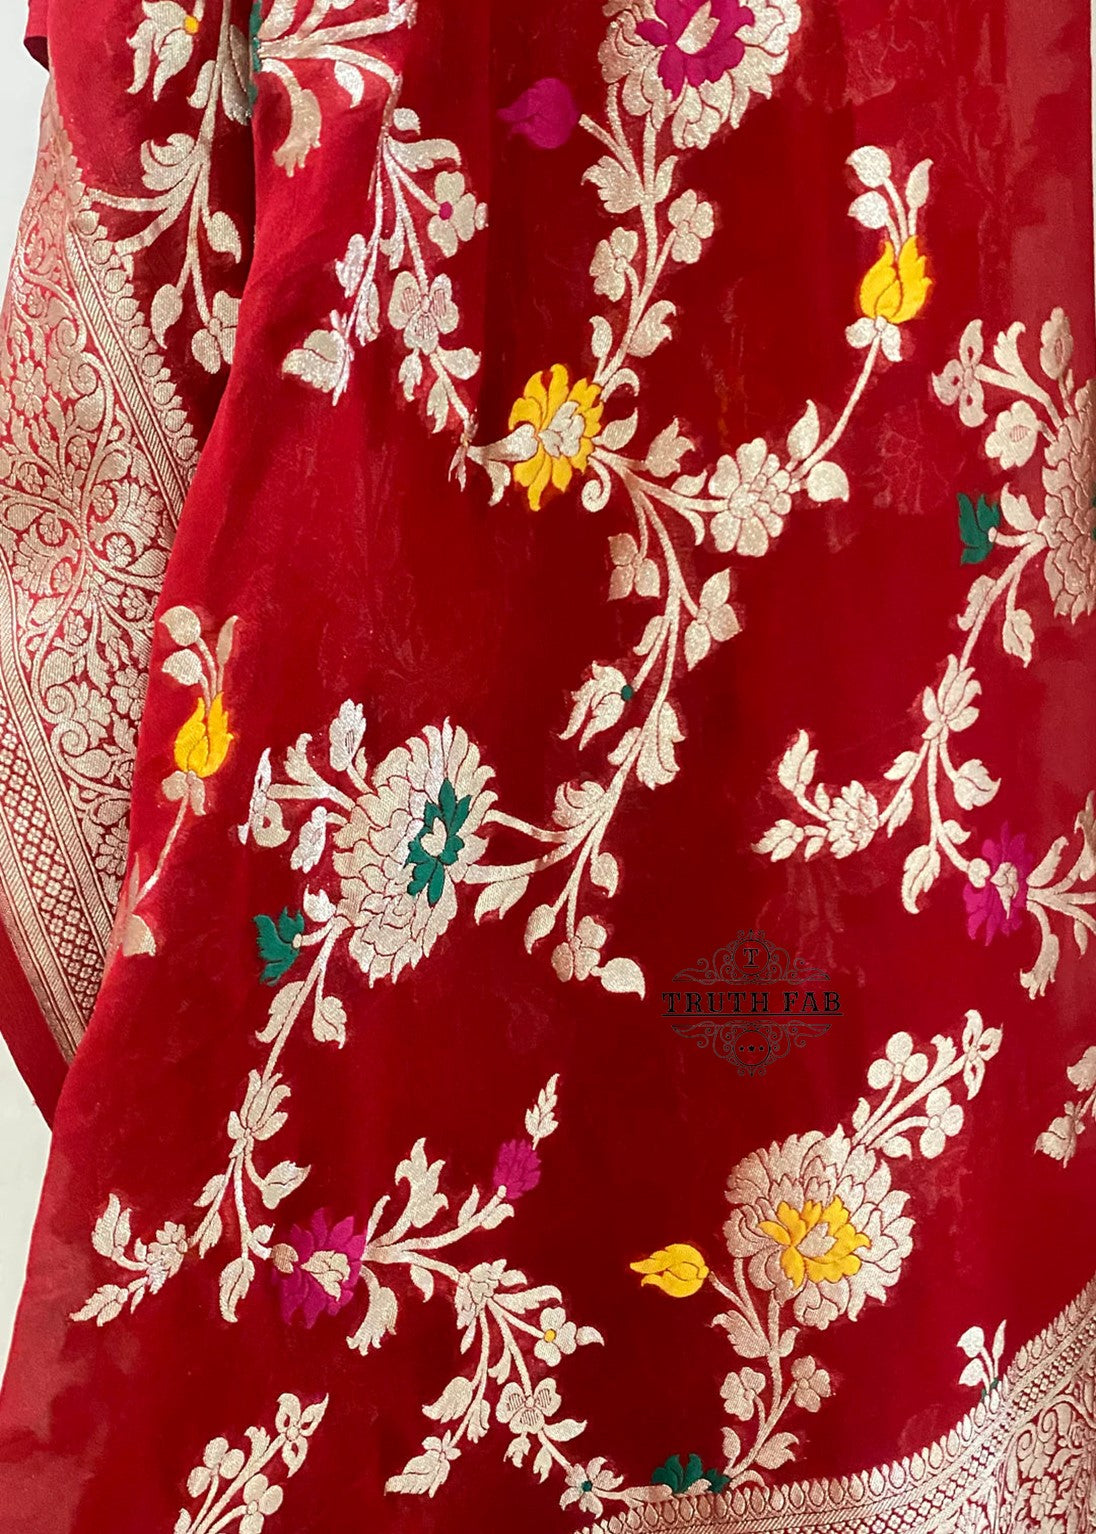 A stunning  pink Banarasi dupatta. The authentic Meenakari jaal work with golden zari handwoven in the finest chiffon georgettes. It takes around 4-5 days to weave this rich and luxurious piece of our tradition.